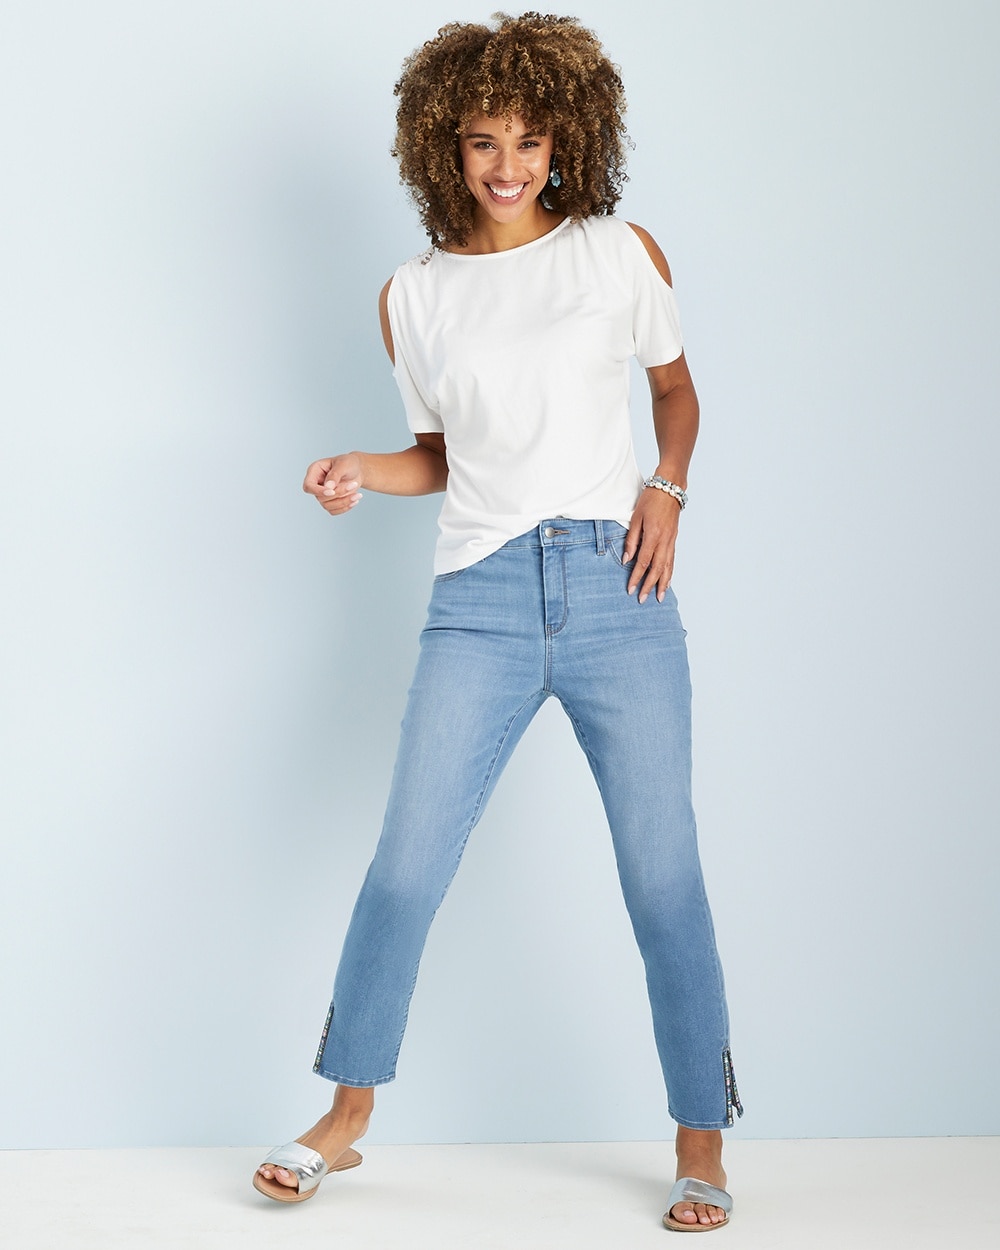 Perfect Stretch Girlfriend Beaded Ankle Jeans